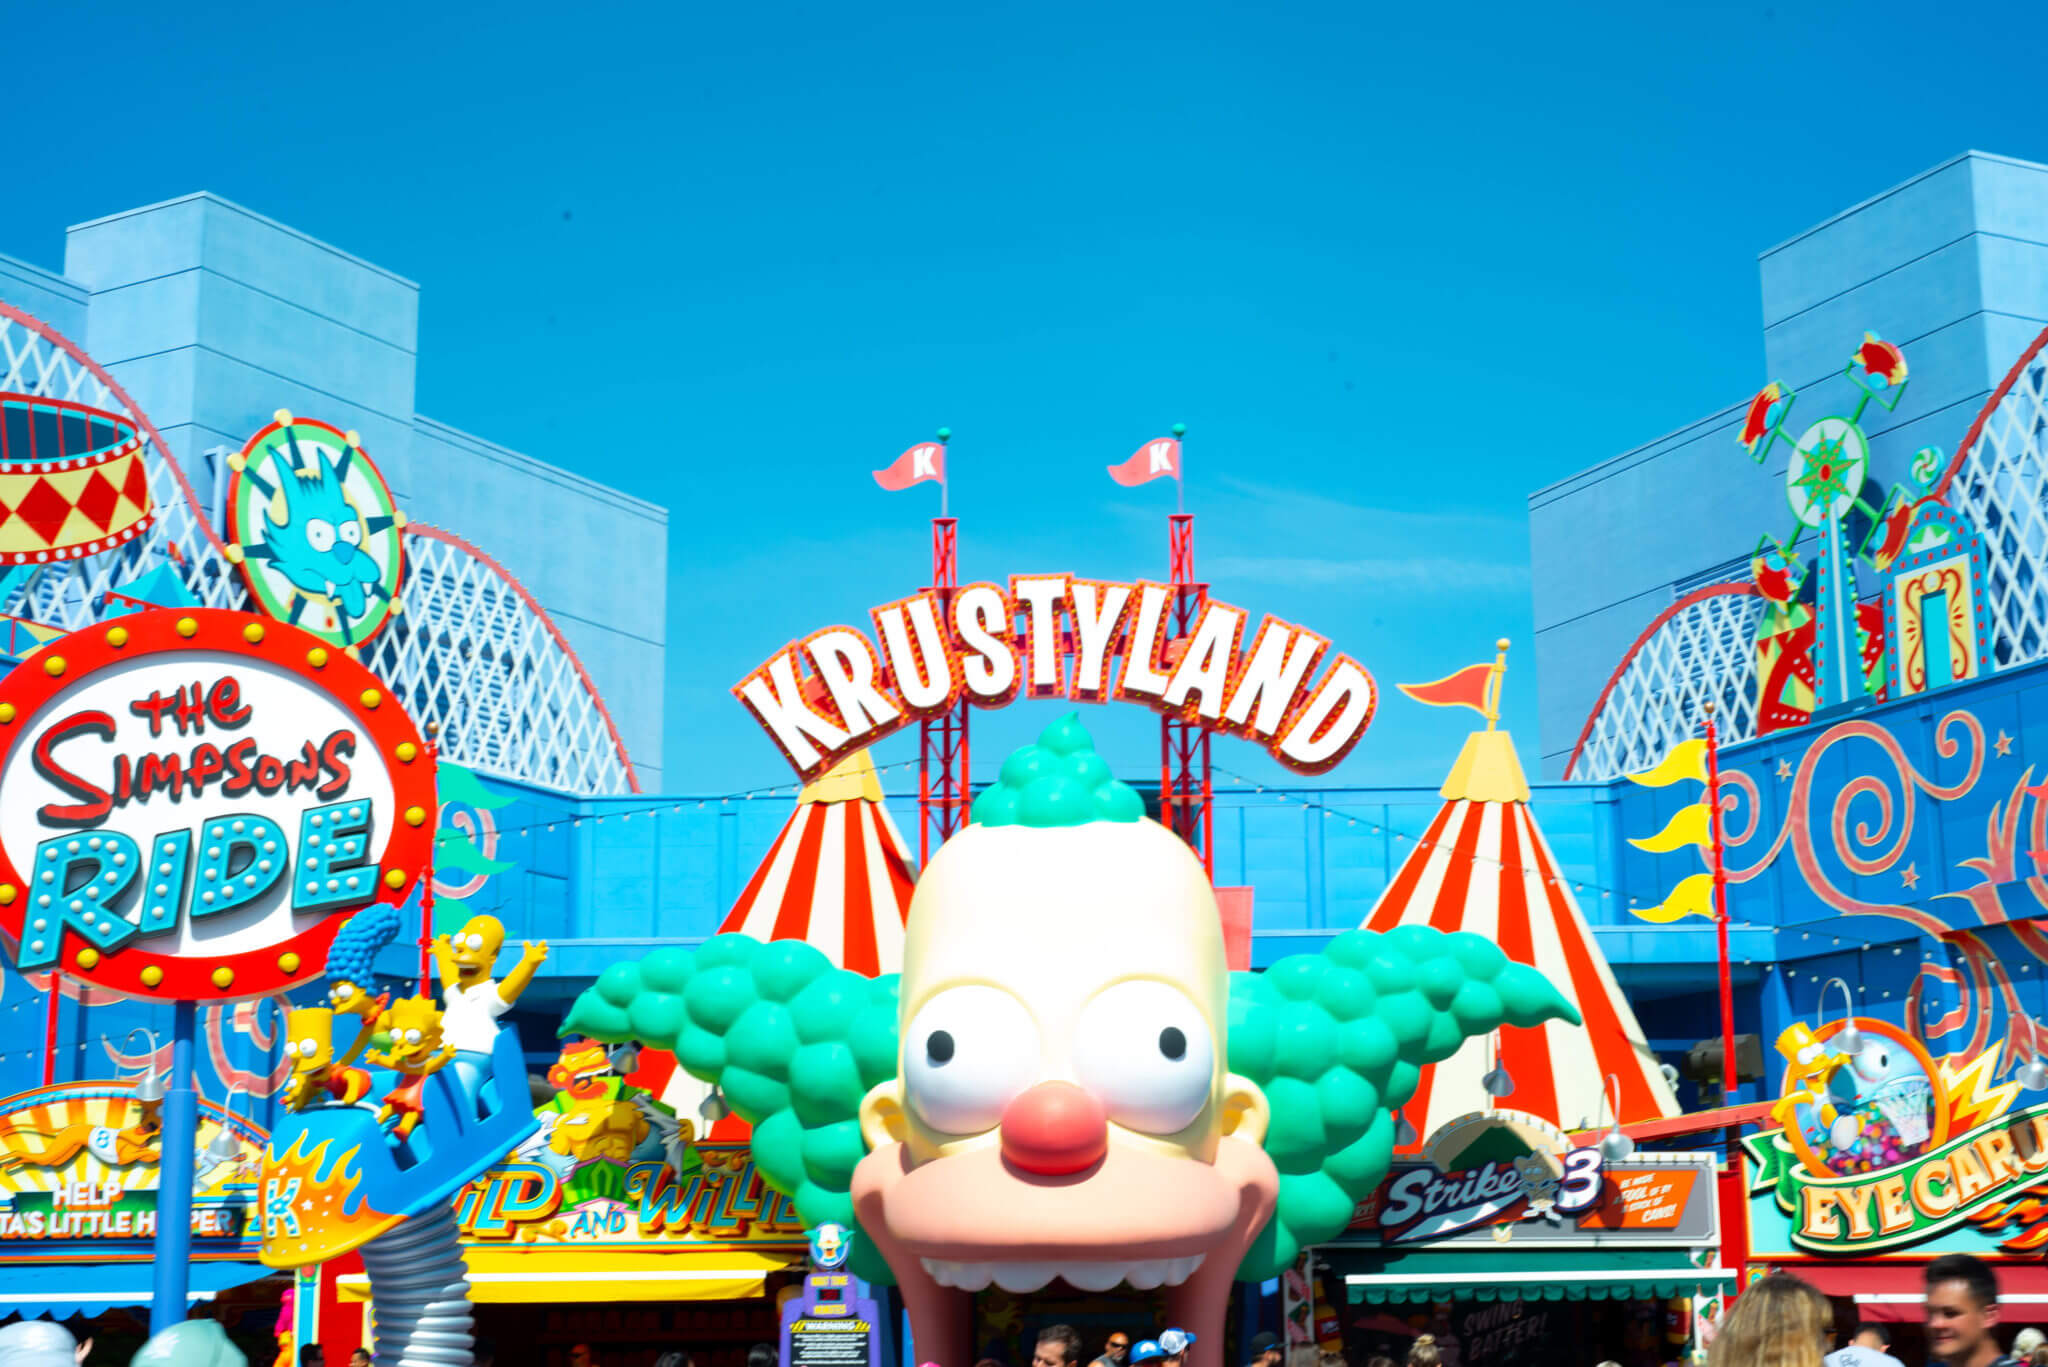 The Simpsons Ride in Krustyland at Universal Studios Hollywood